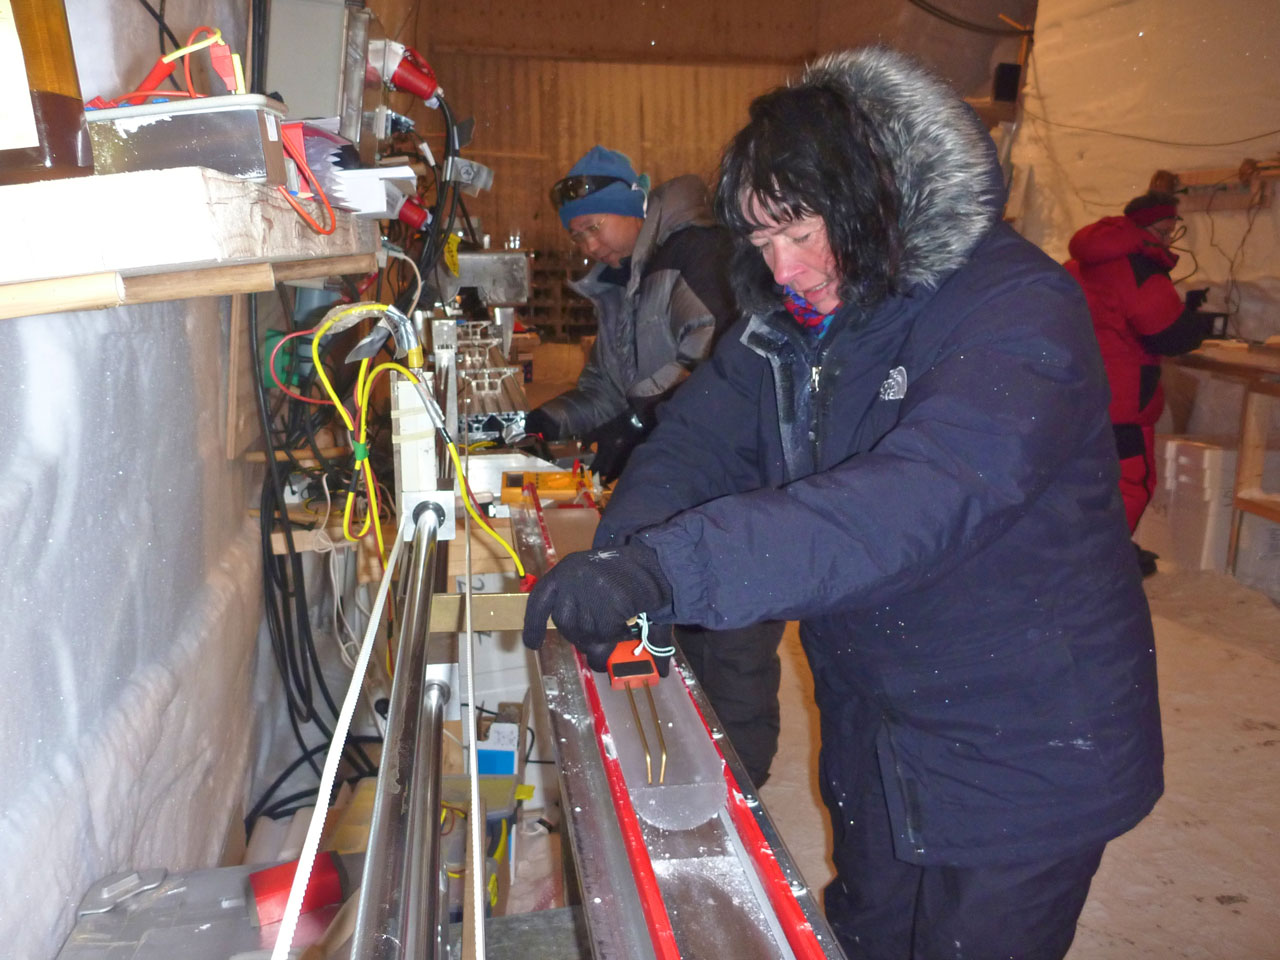 Working on the ice core